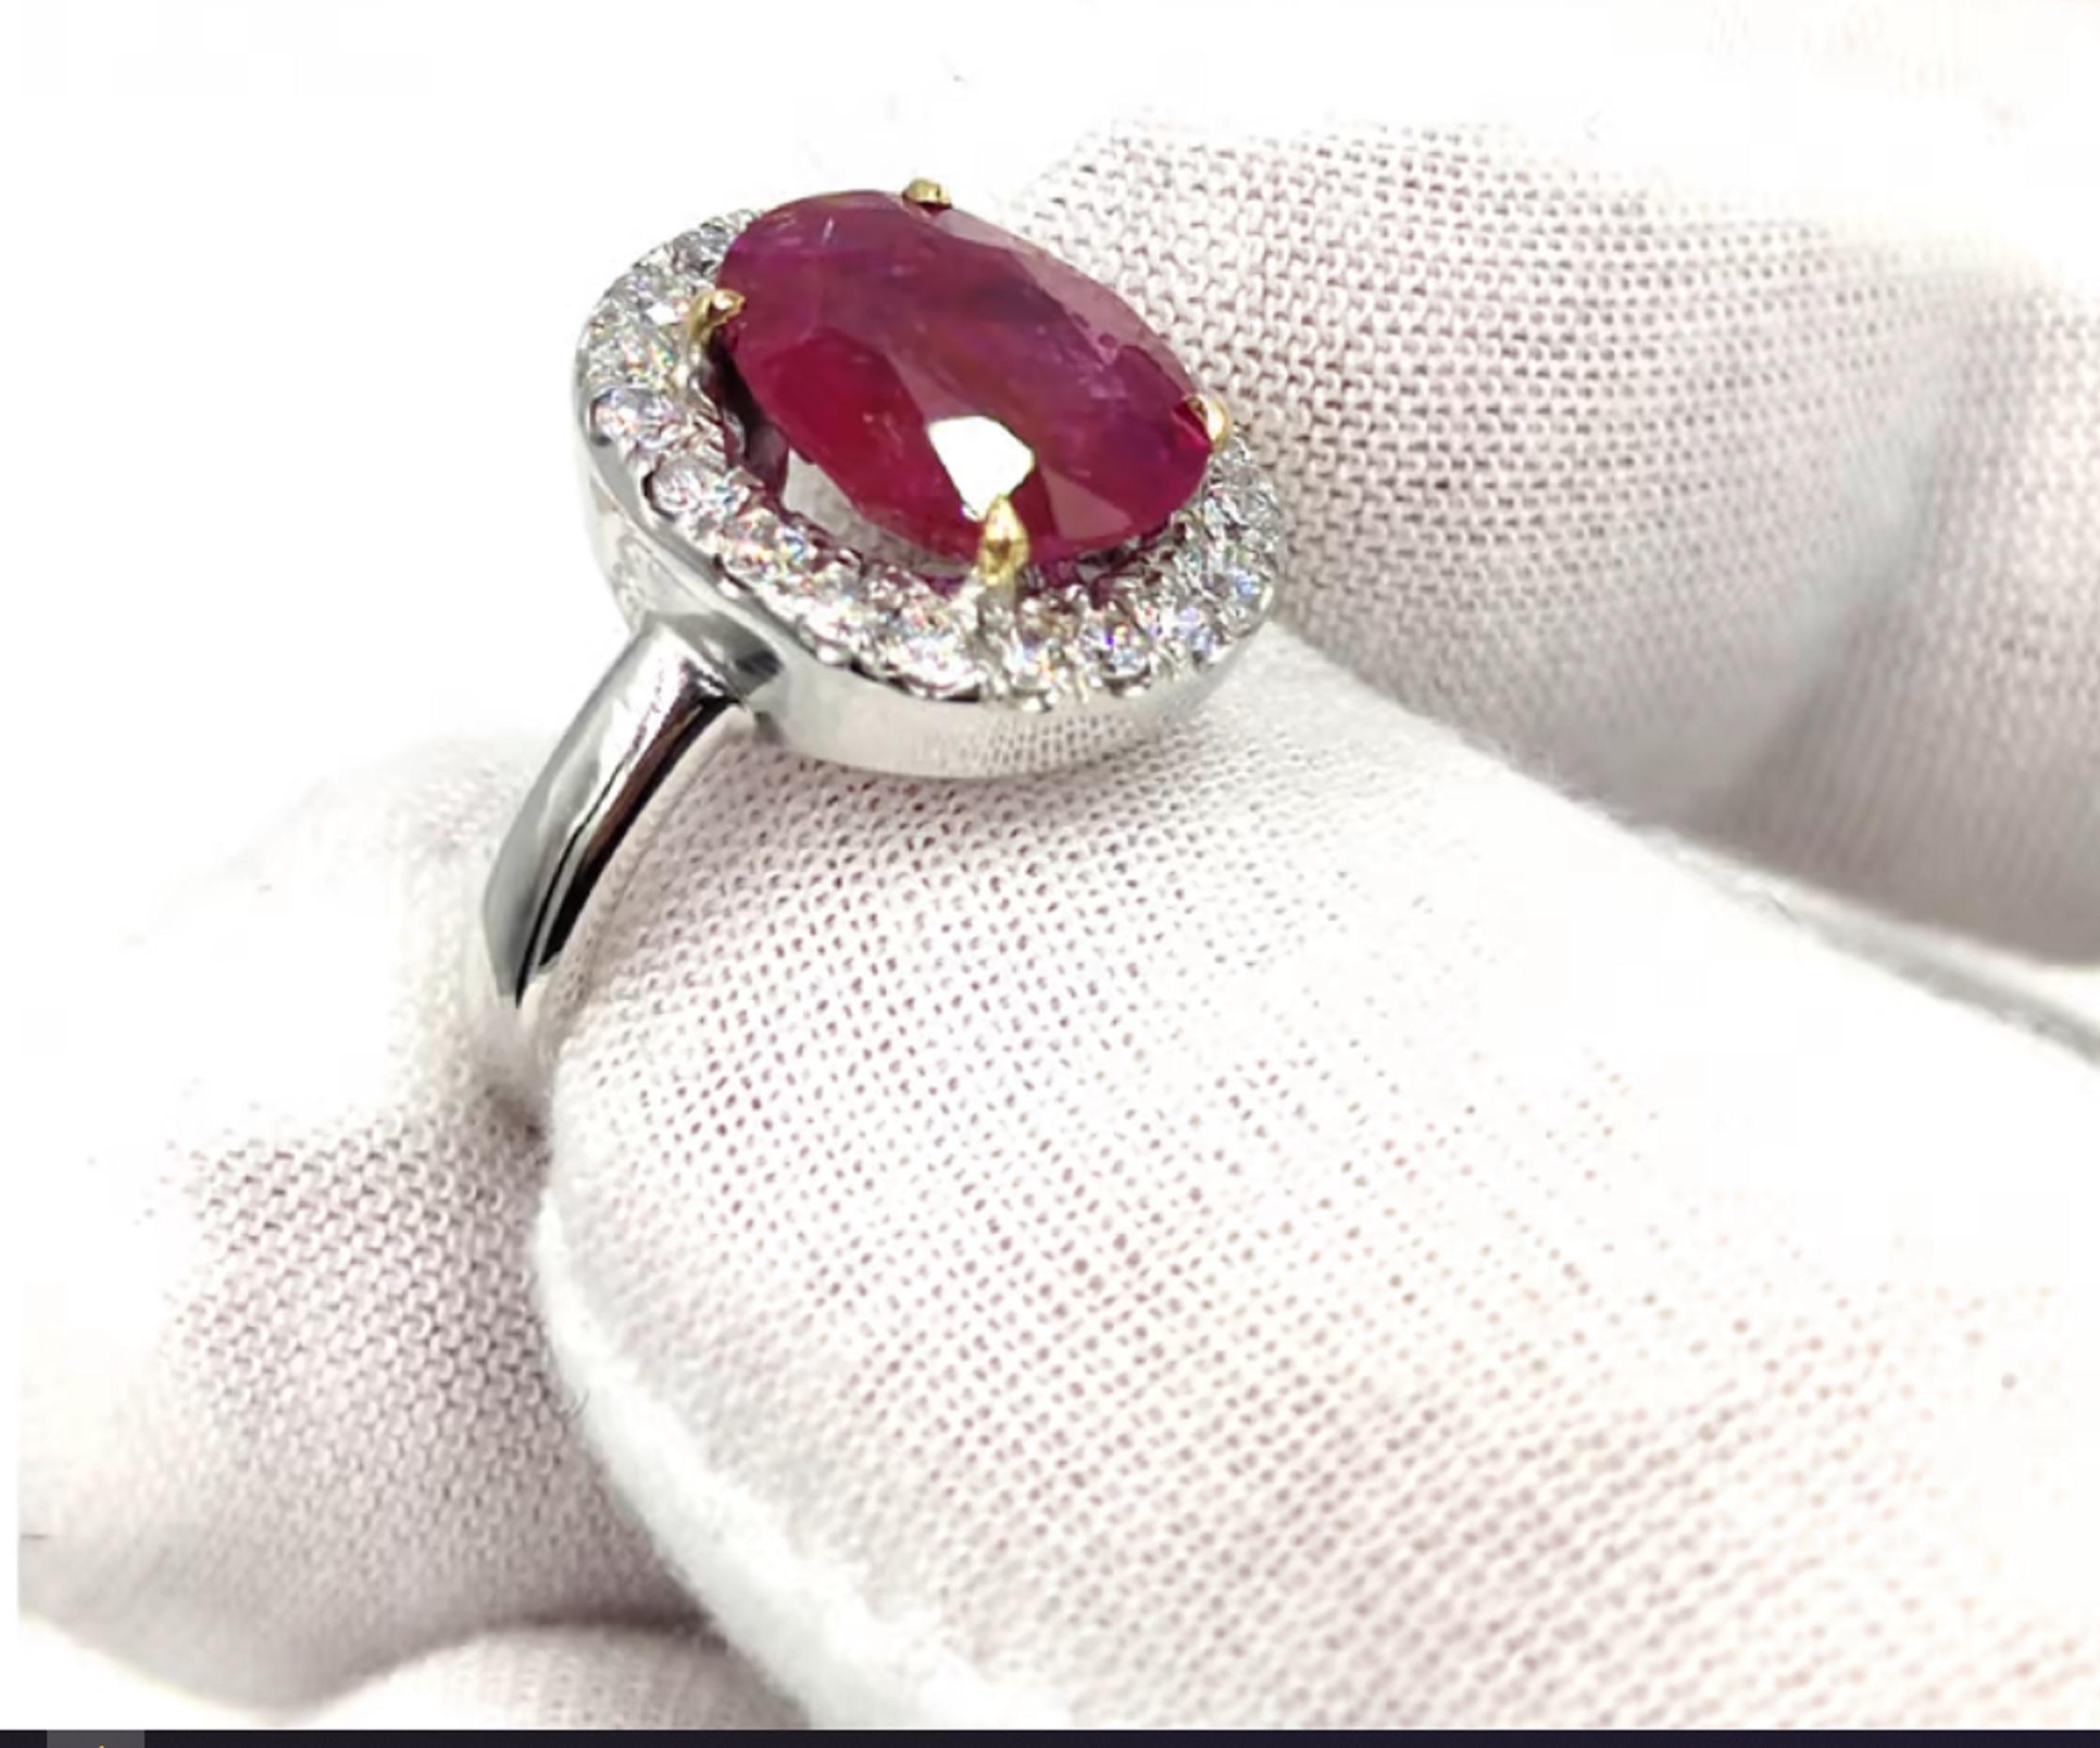 Amazing Natural 7 carat ruby diamond ring.

The ring is an absolute marvel and has an exquisite halo of round brilliant cut diamonds.

This ring is one of kind and considering the amazing red the ruby has it cannot be replaced.

